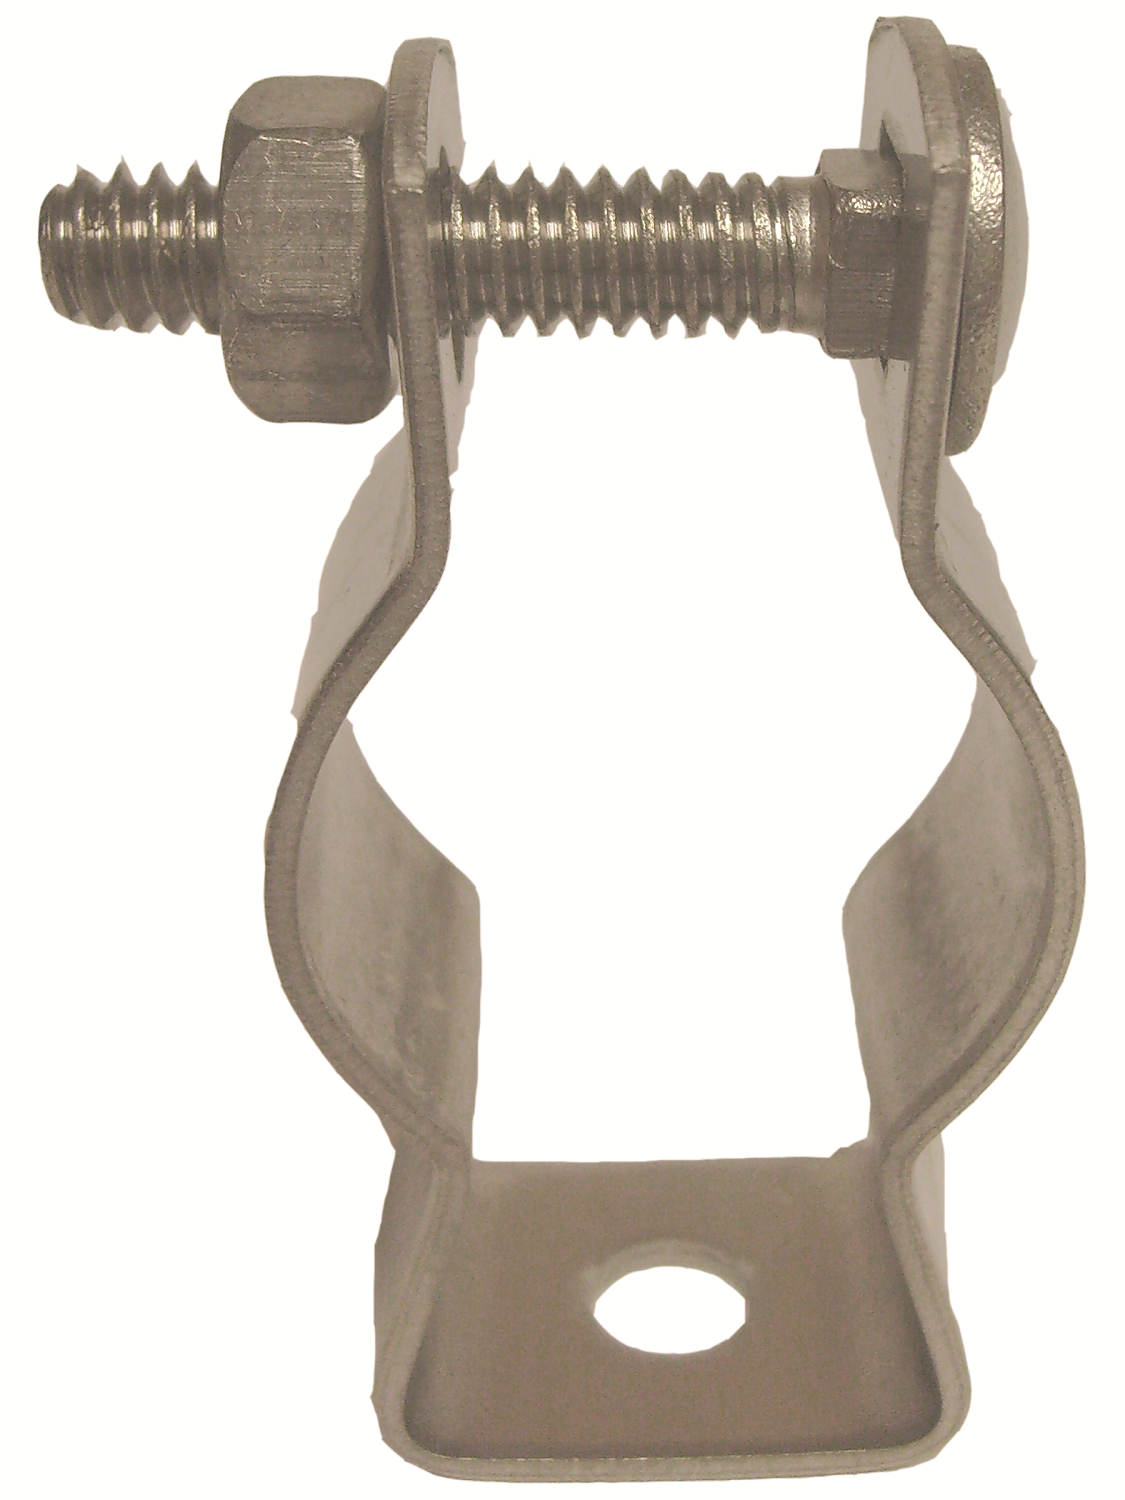 Allied Tube & Conduit HCS1KON Conduit Hanger With Nut and Bolt, 3/4 in Conduit, 50 lb Load, Carbon Steel